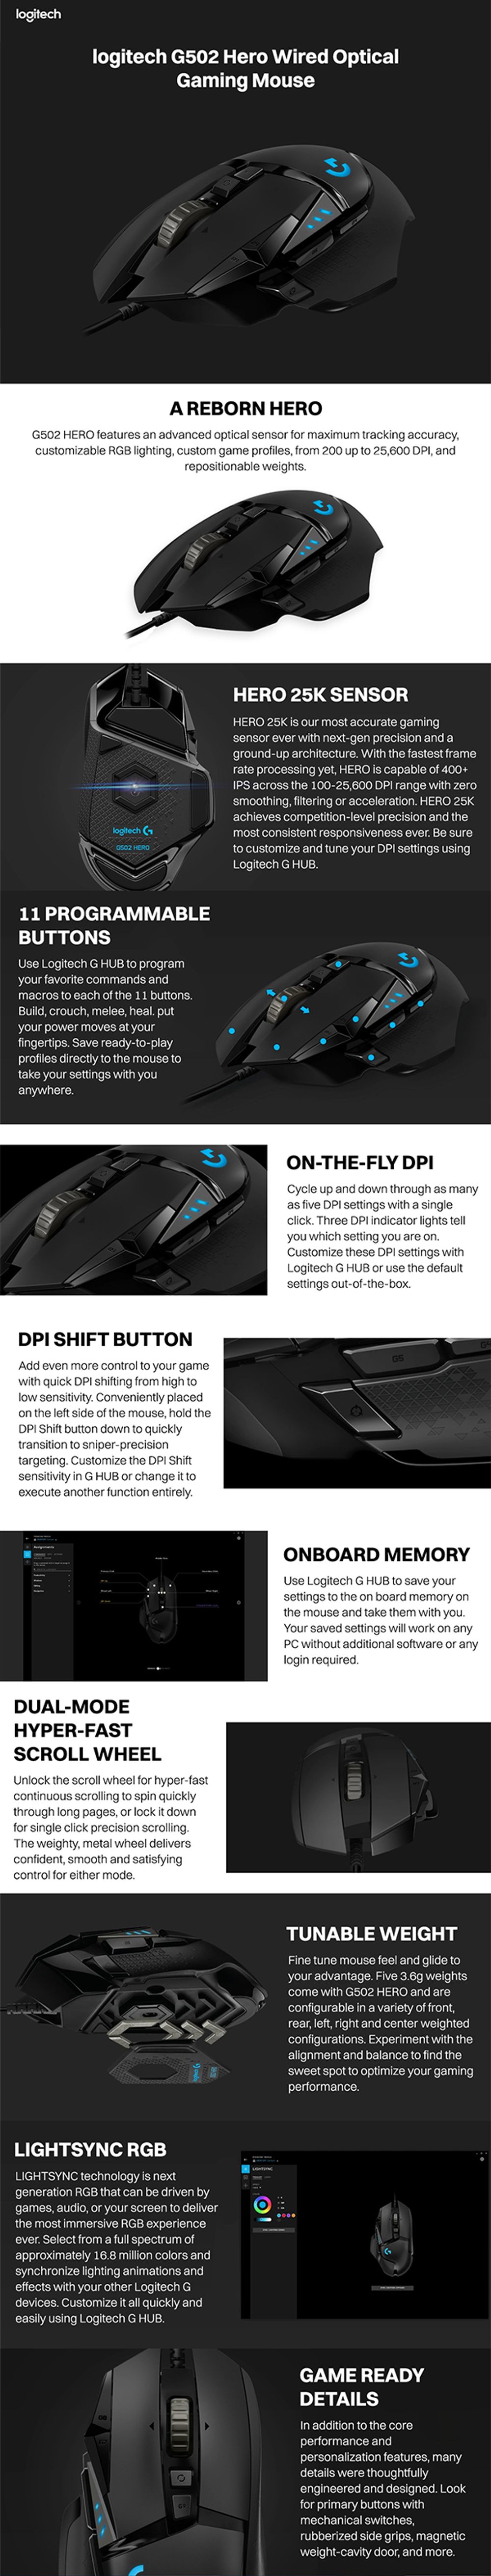 Logitech G402 Mouse Review 2021 - Down on Price, Down on Features